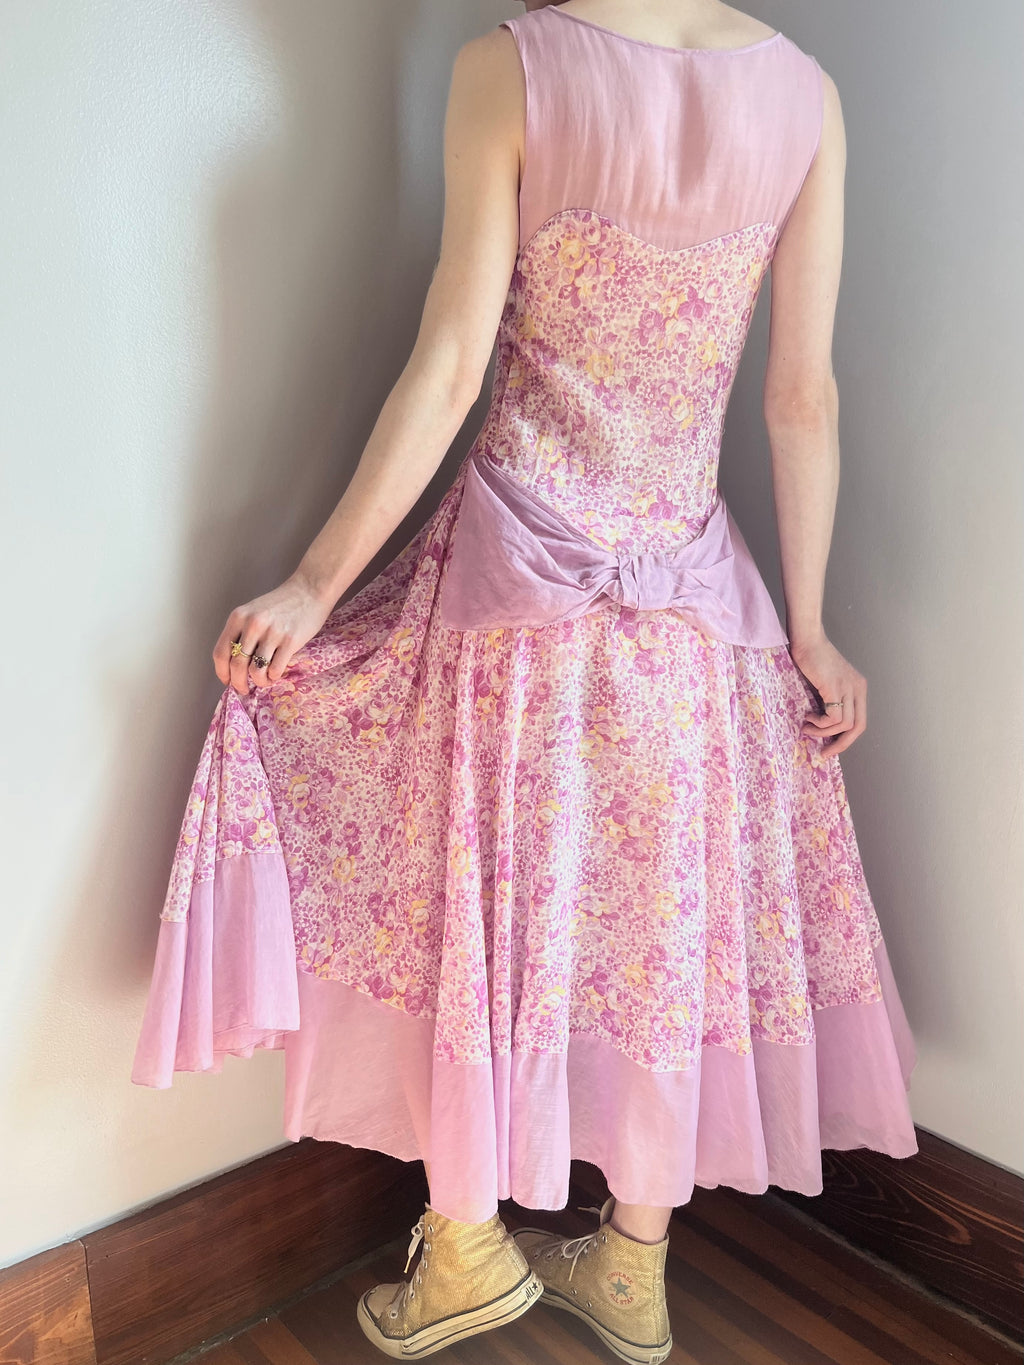 1930s Rose Floral Printed Cotton Bias Cut Dress Gown Bow Purple Yellow